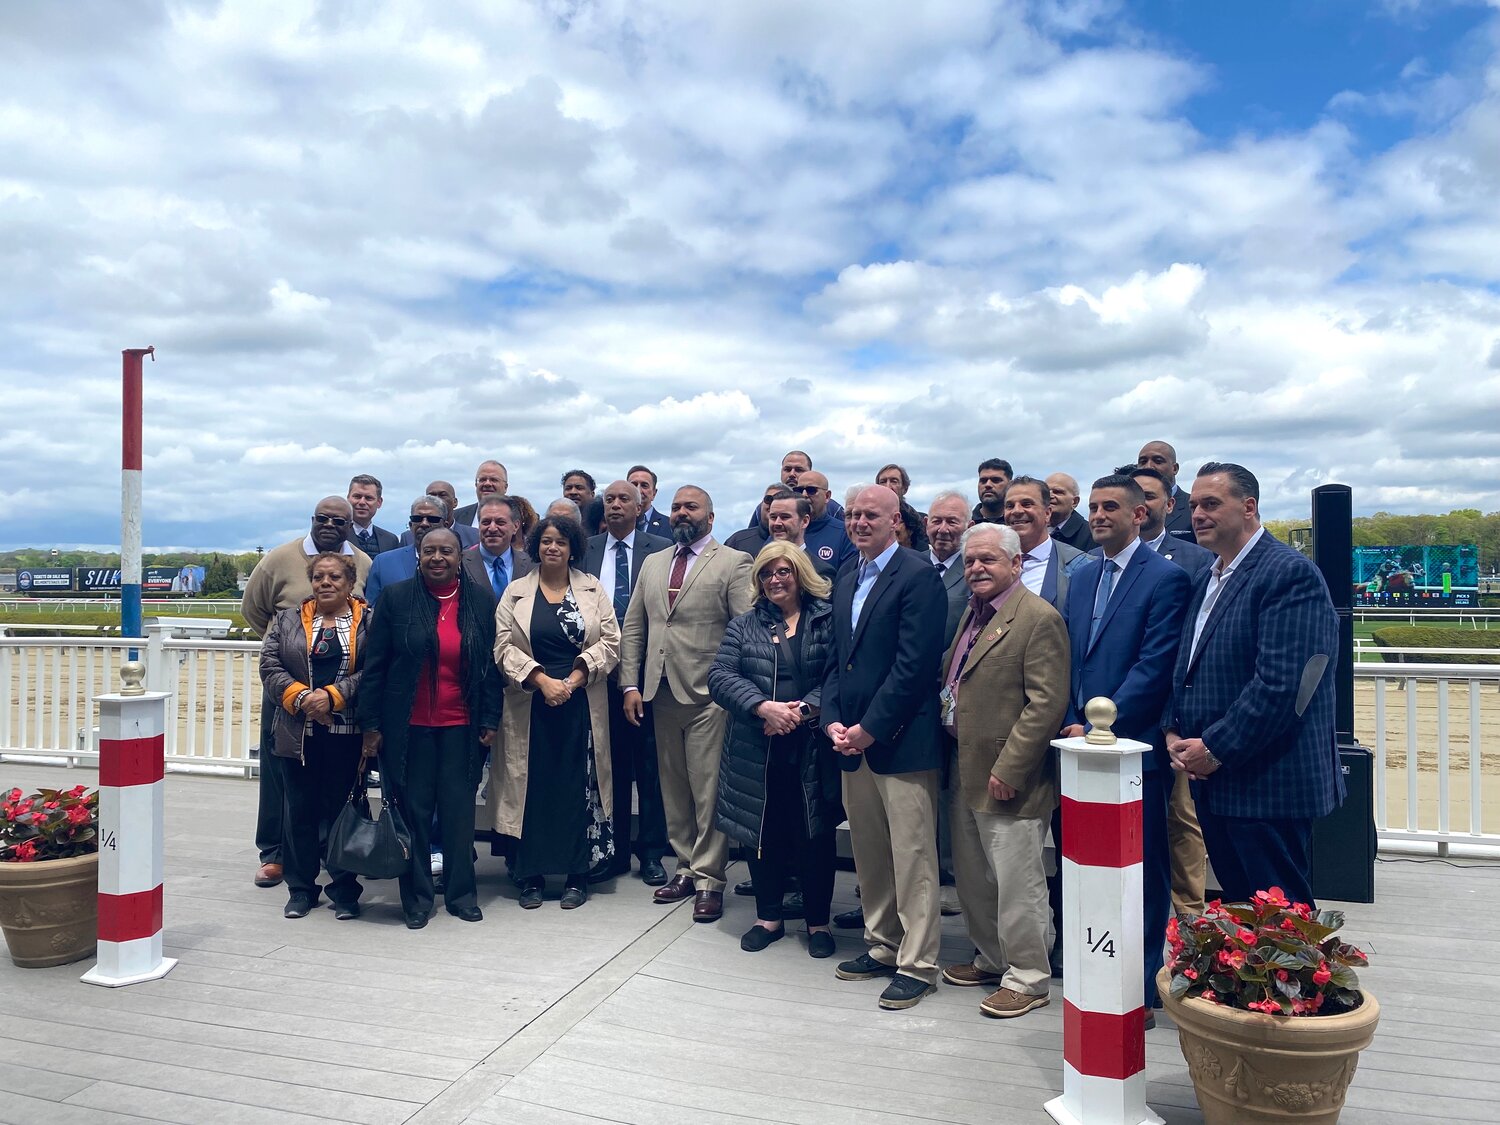 Opening day at Belmont Park this year kicked off with the announcement of a $455 million state-approved loan to renovate the horse racing facility. Elected officials, Elmont community leaders and the New York Racing Association celebrated the news.